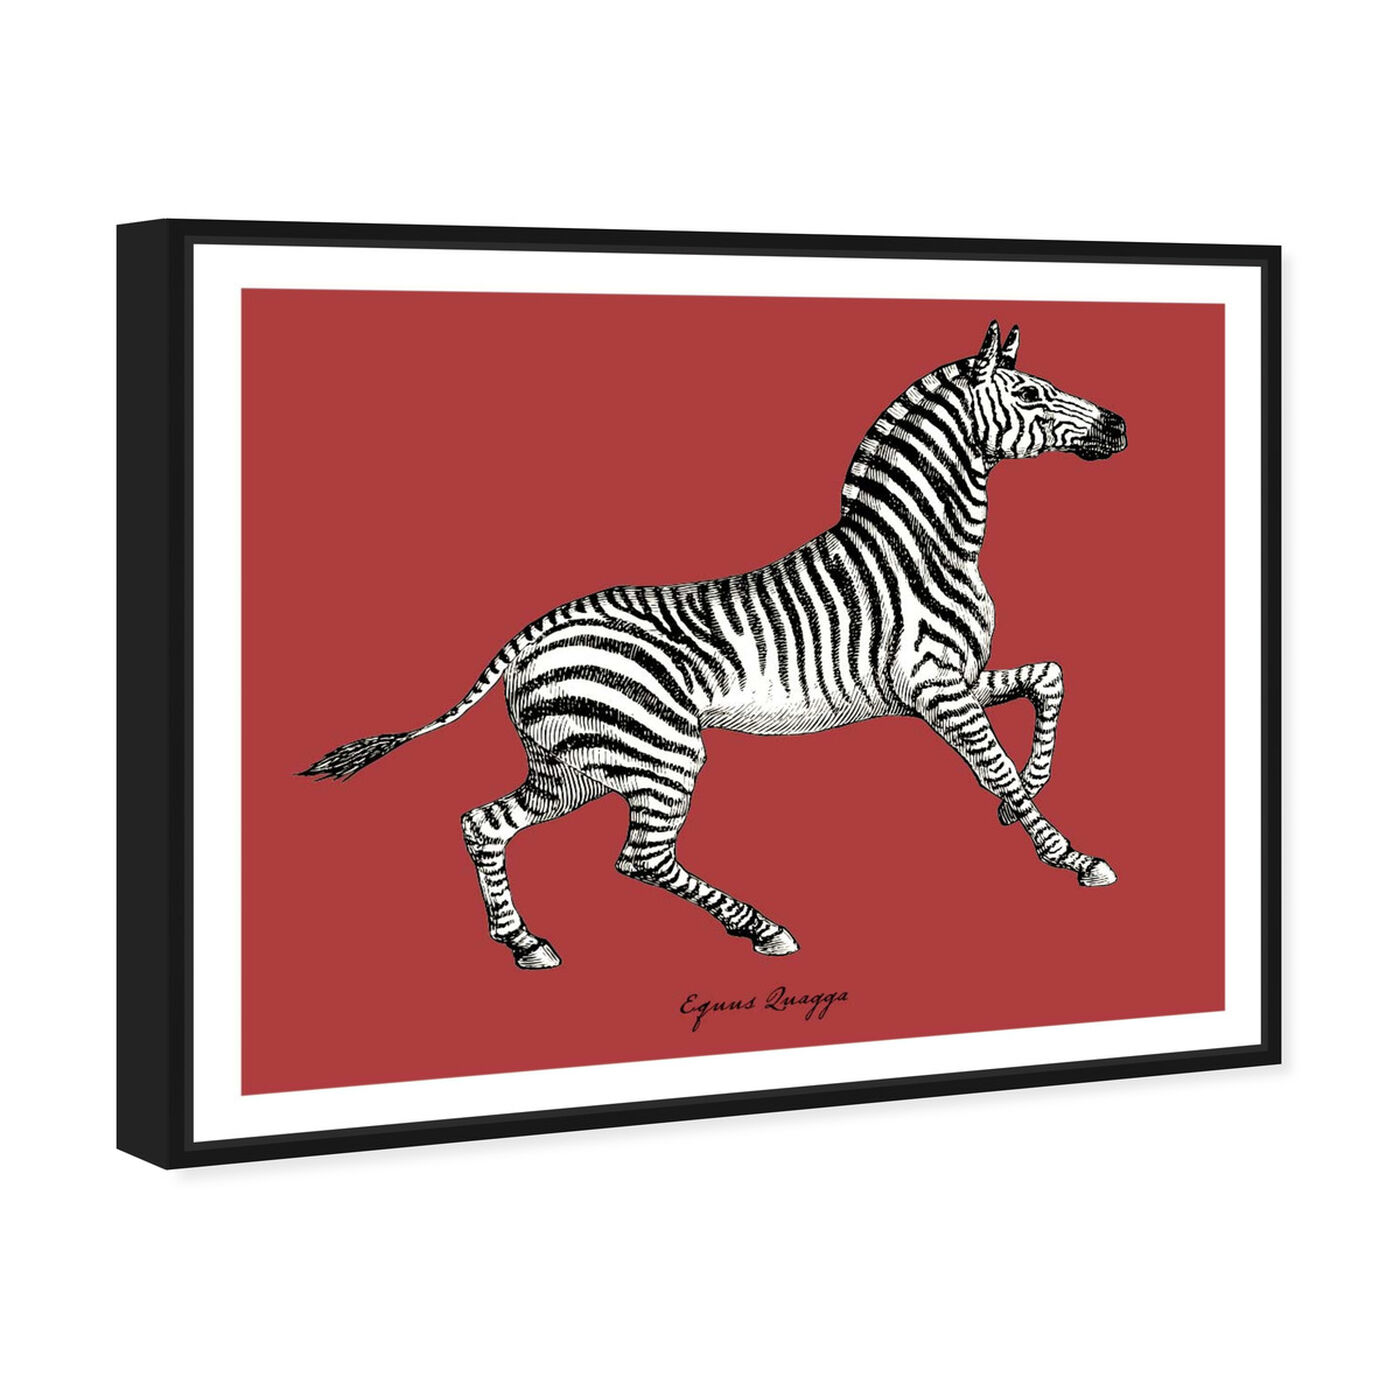 Angled view of Equus Quagga featuring animals and zoo and wild animals art.